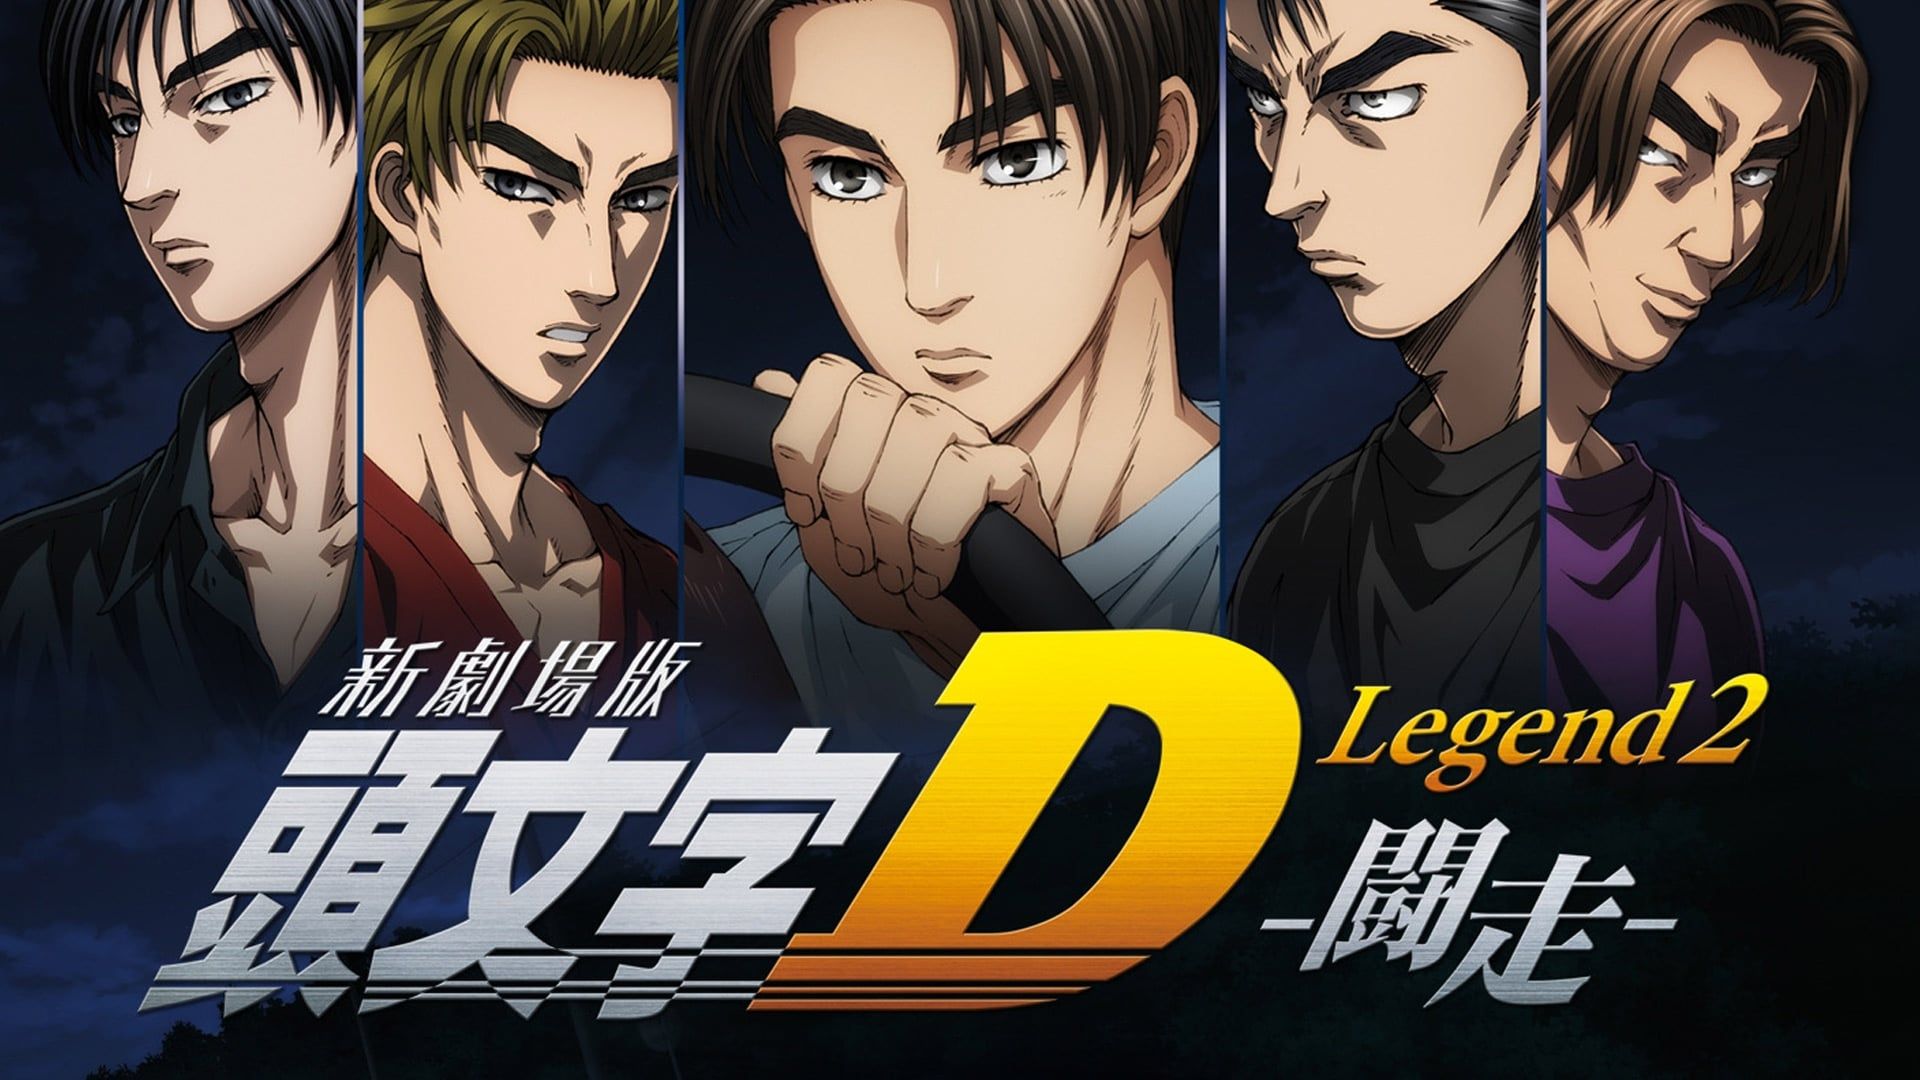 New Initial D the Movie: Legend 2 - Racer background